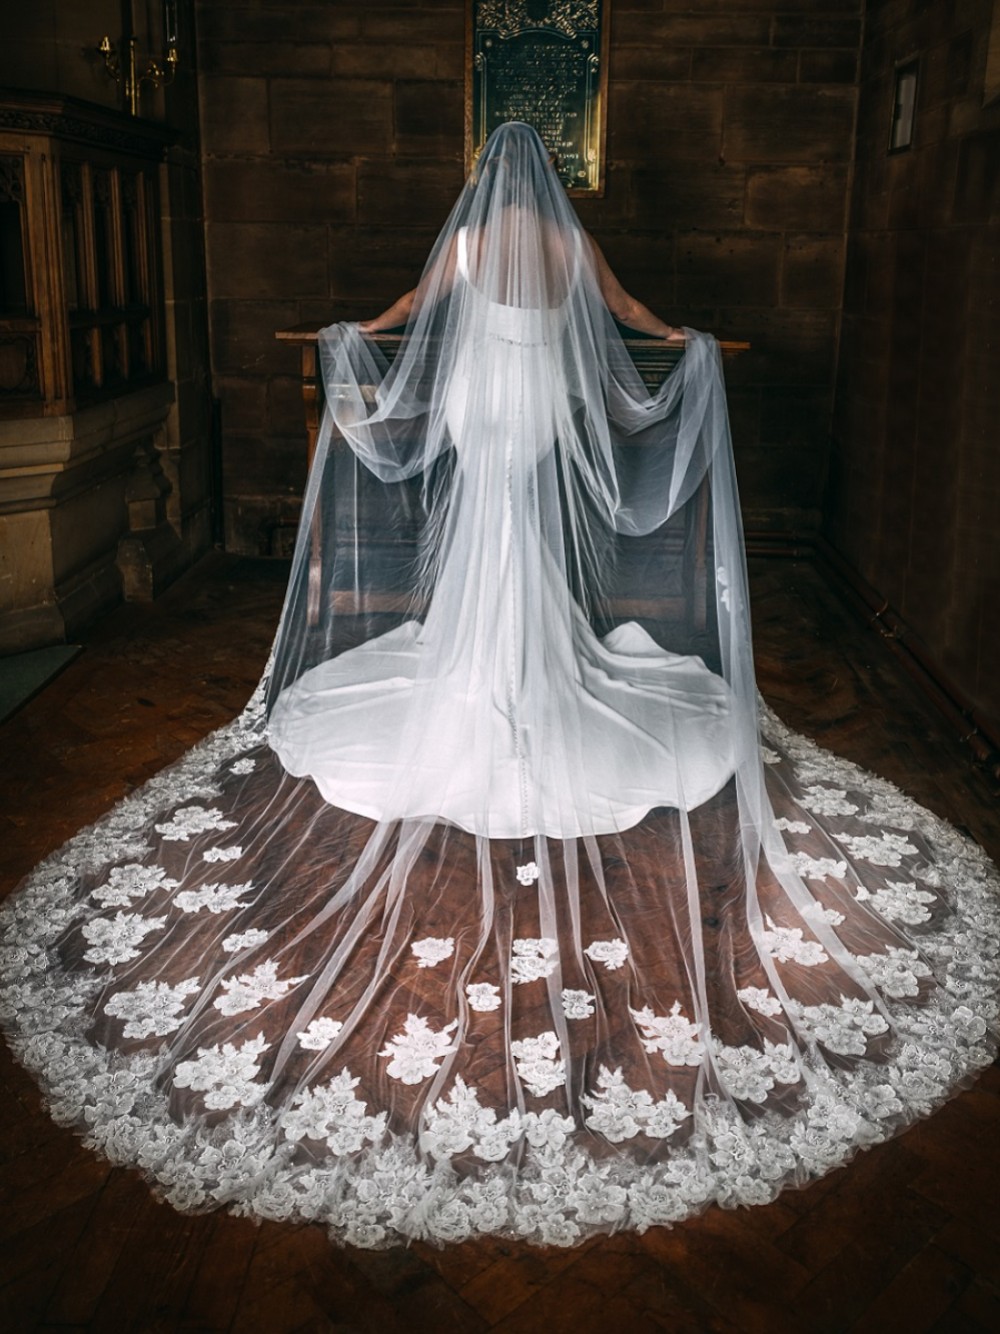 Photograph of Perfect Bridal Ivory Single Tier Beaded Floral Lace Cathedral Veil with Motifs